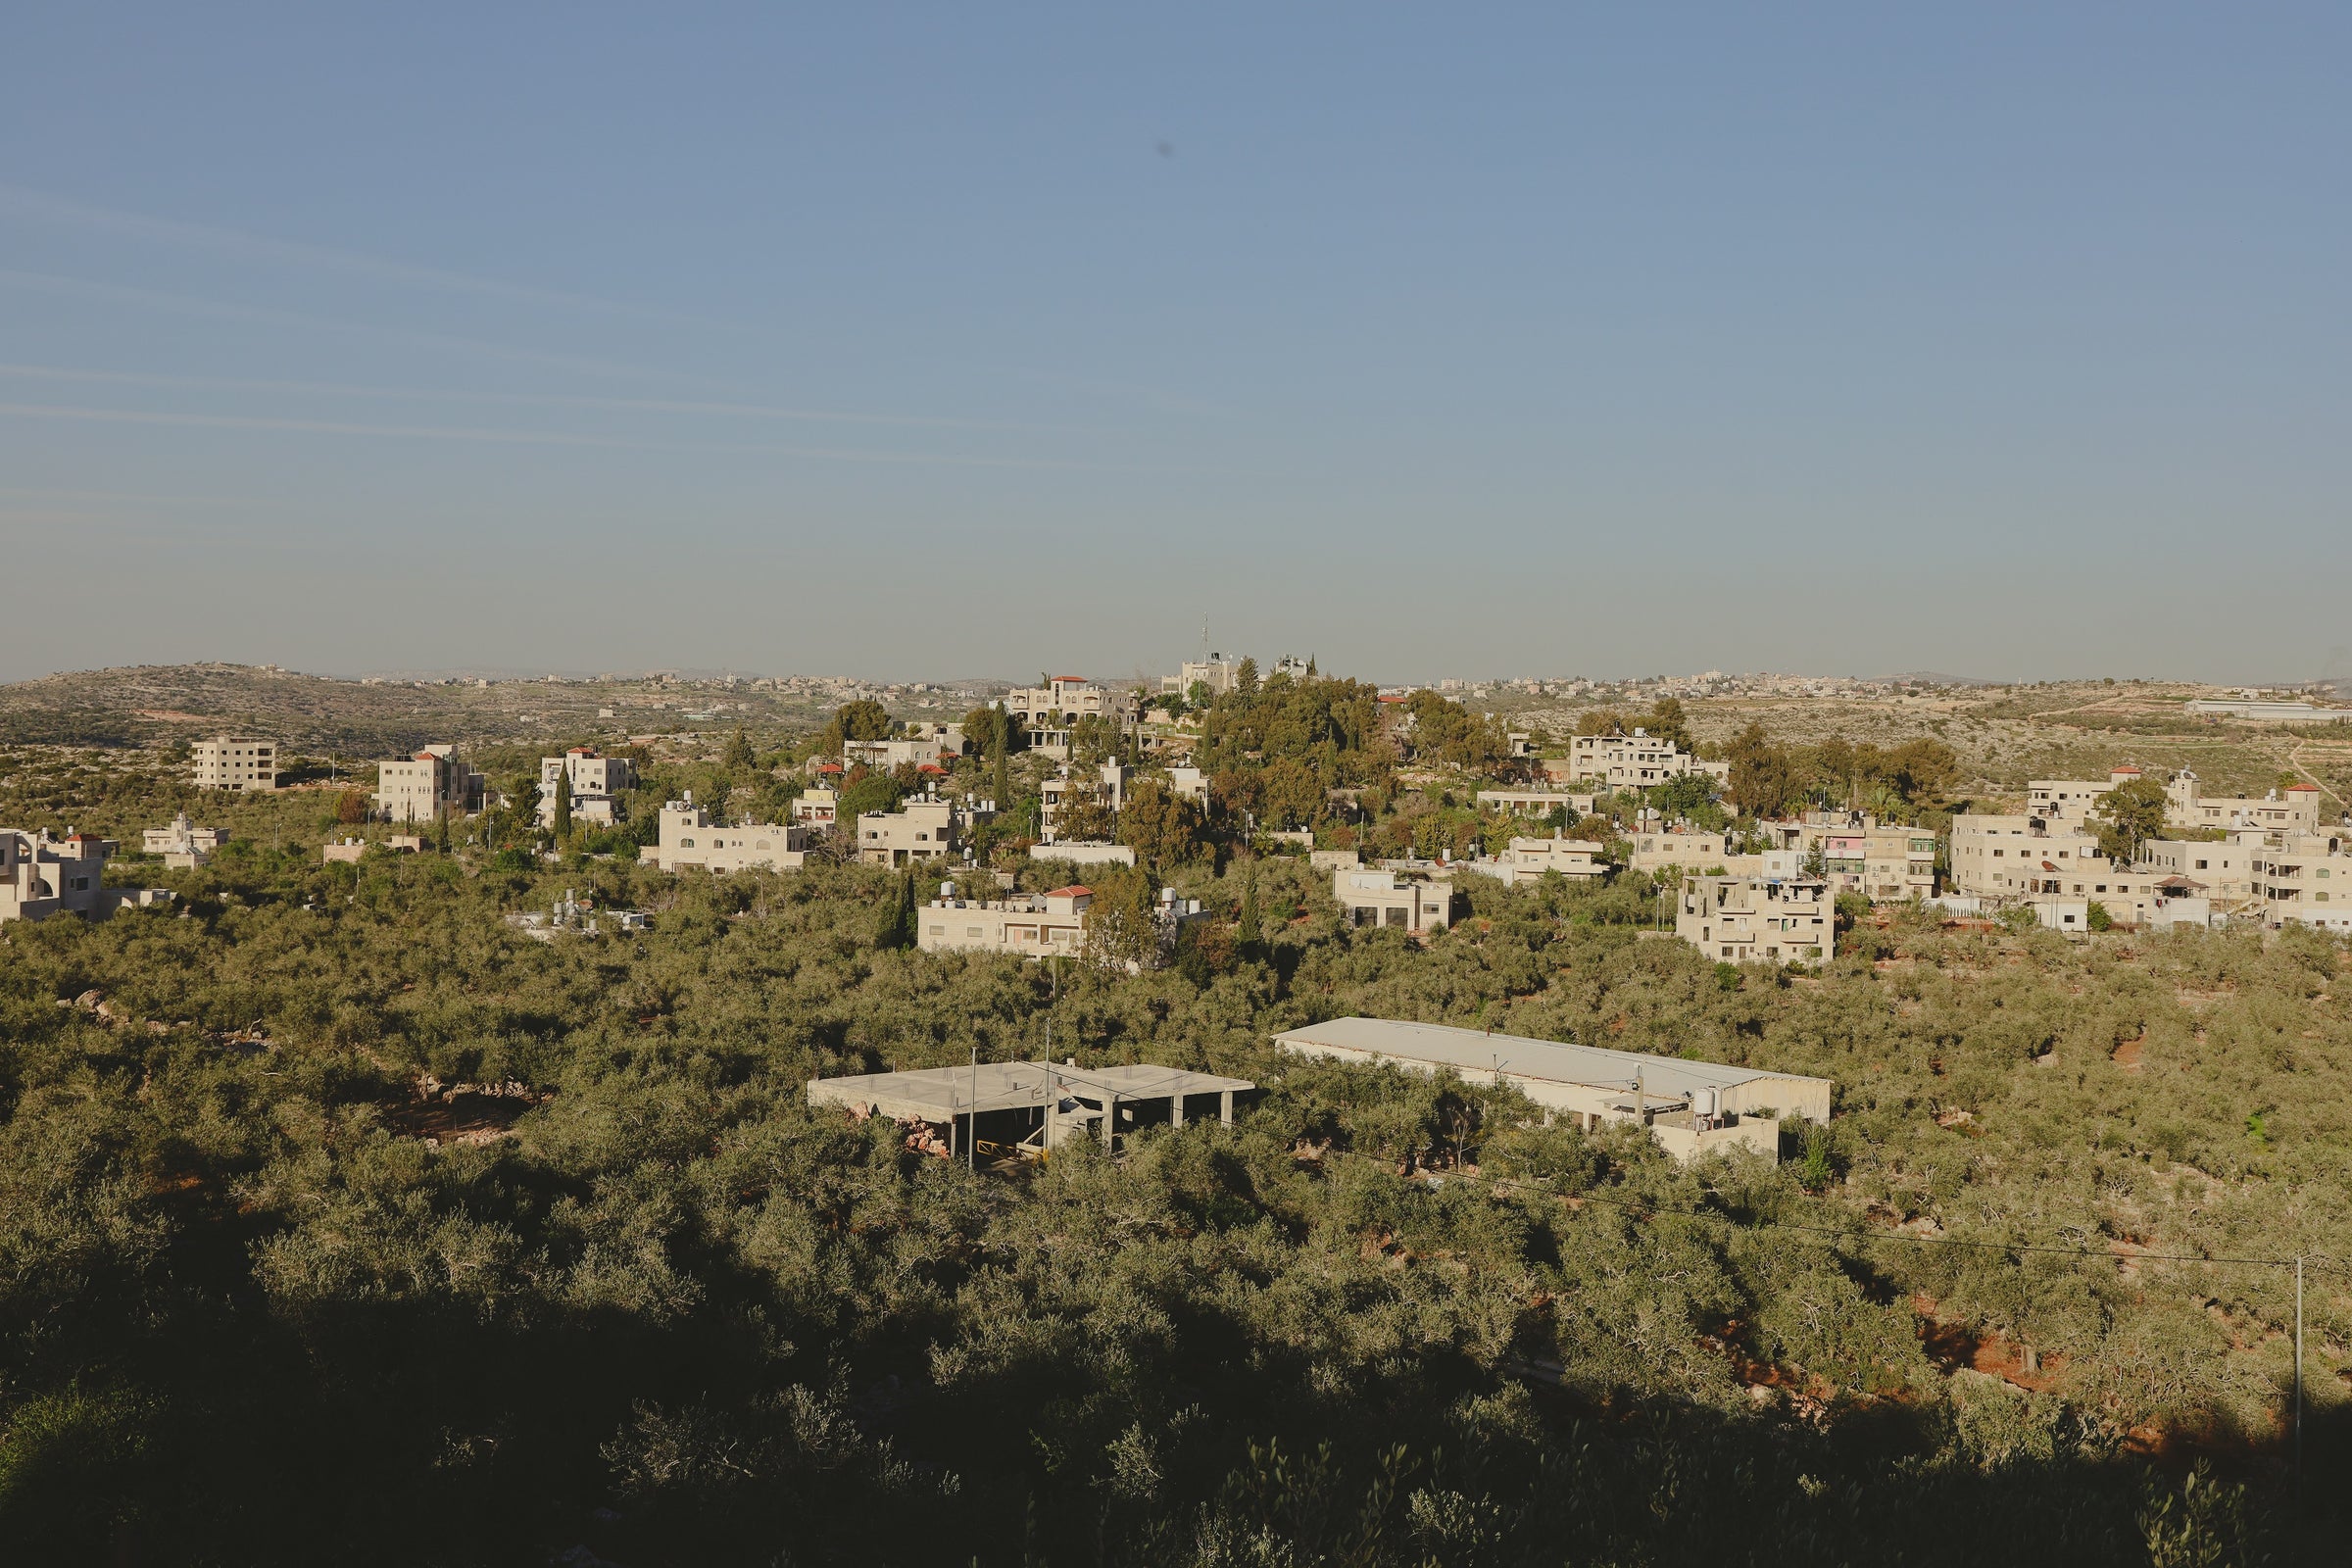 Aboud Village - Home of our Palestinian Olive Oil Extraction Center